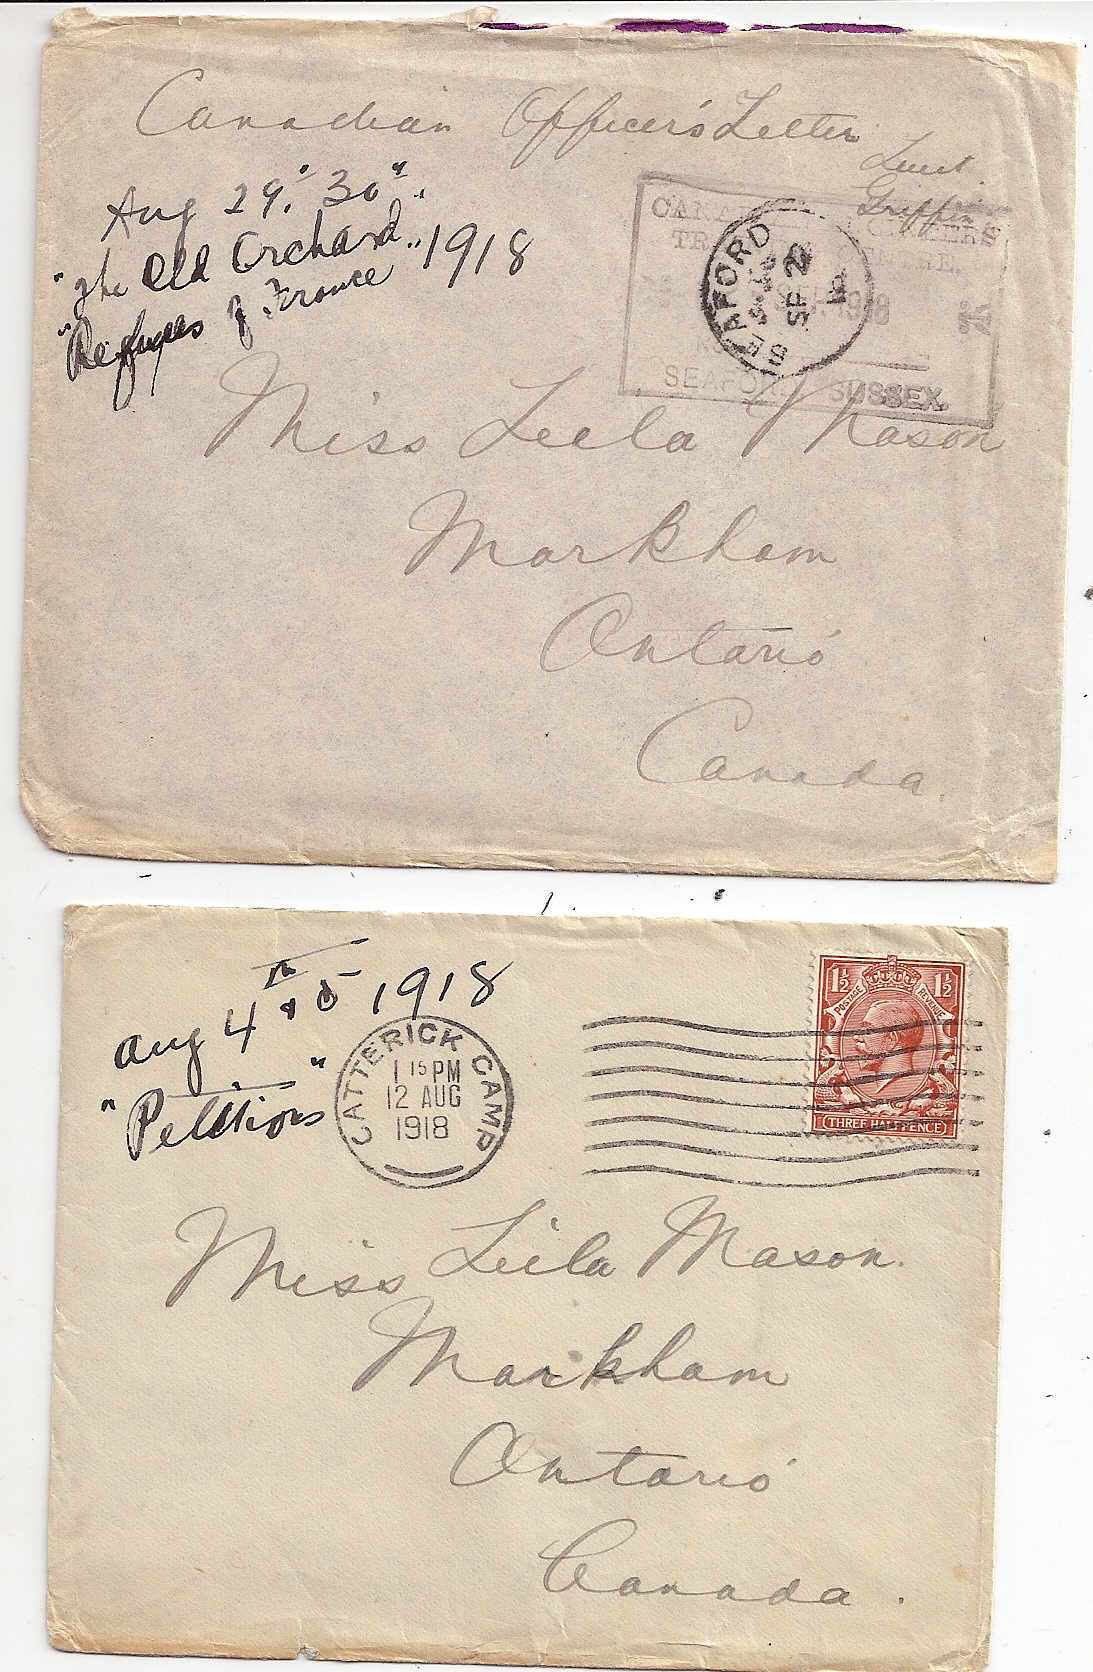 Russia Postal History - Allied Intervention. Canadian Forces in North Russia Scott 12 